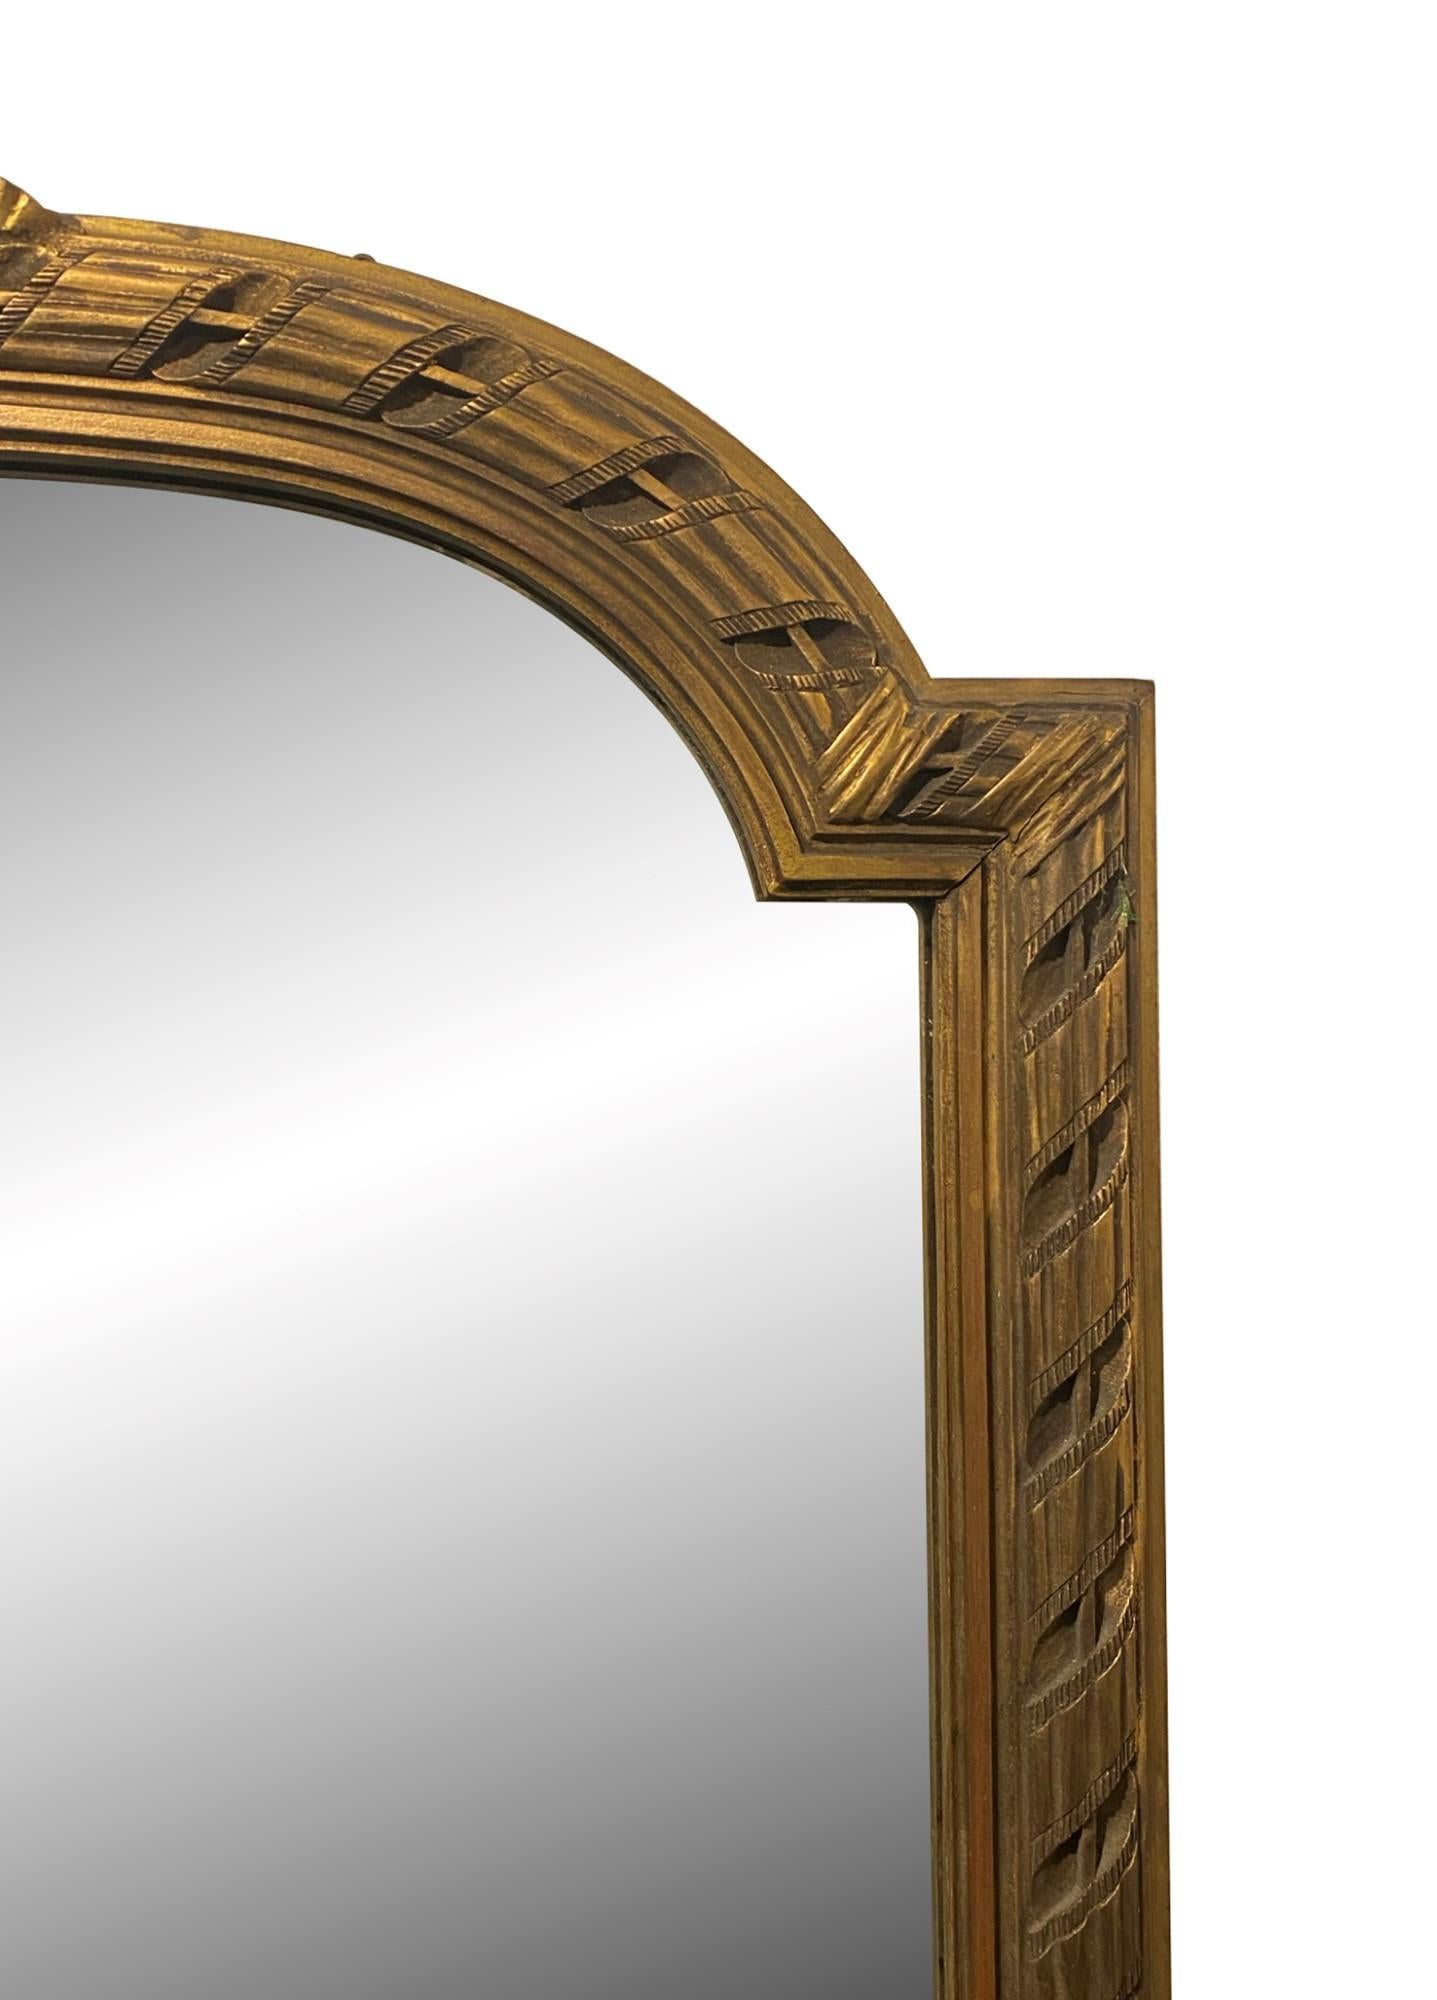 French Early 20th C. Gilted Wood Mirror Louis XVI Style from France, Over Mantel